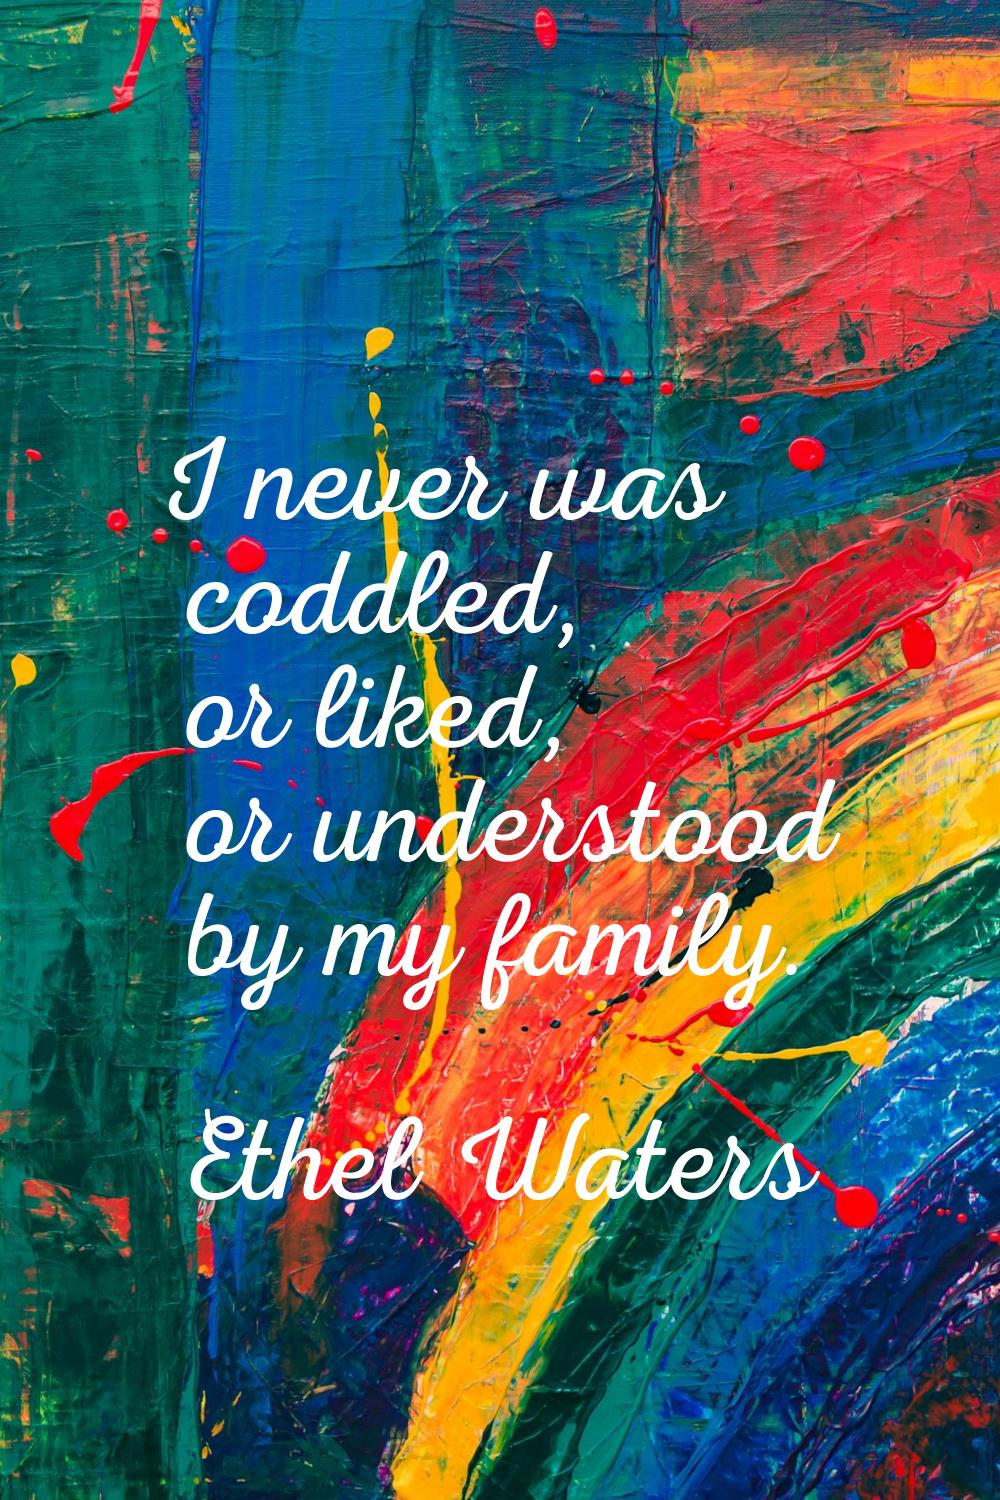 I never was coddled, or liked, or understood by my family.